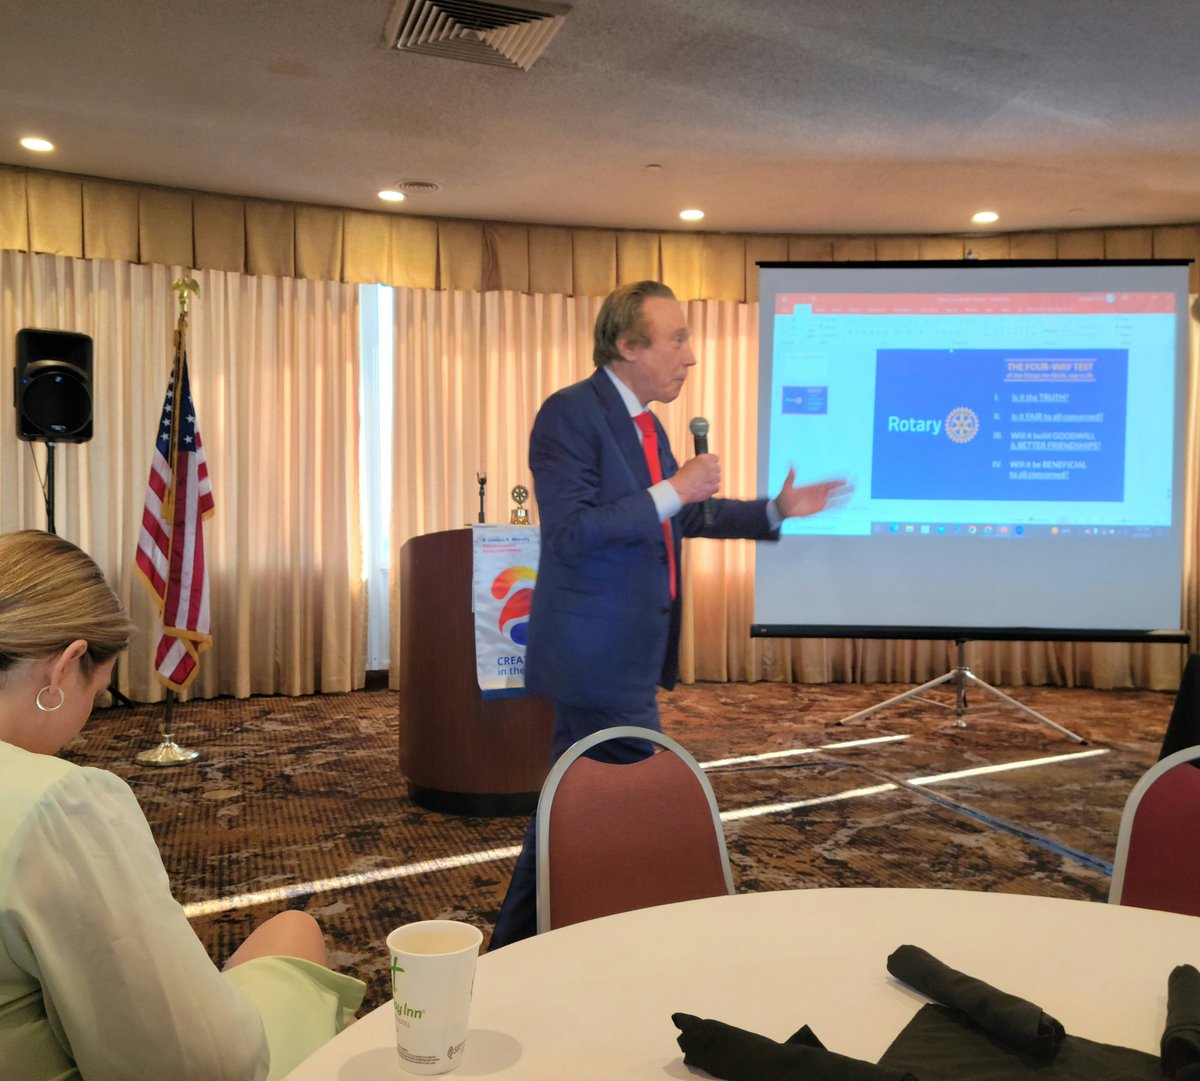 Presidential Candidate Perry @PJQualityGuru Johnson tells Friday morning #DMAMRotary Club the federal gov't has to improve its quality & efficiency standards. Says his 2 Cents to Save America economic plan is a good first step. 🇺🇸 #PresidentialSpeakerSeries #ServiceAboveSelf